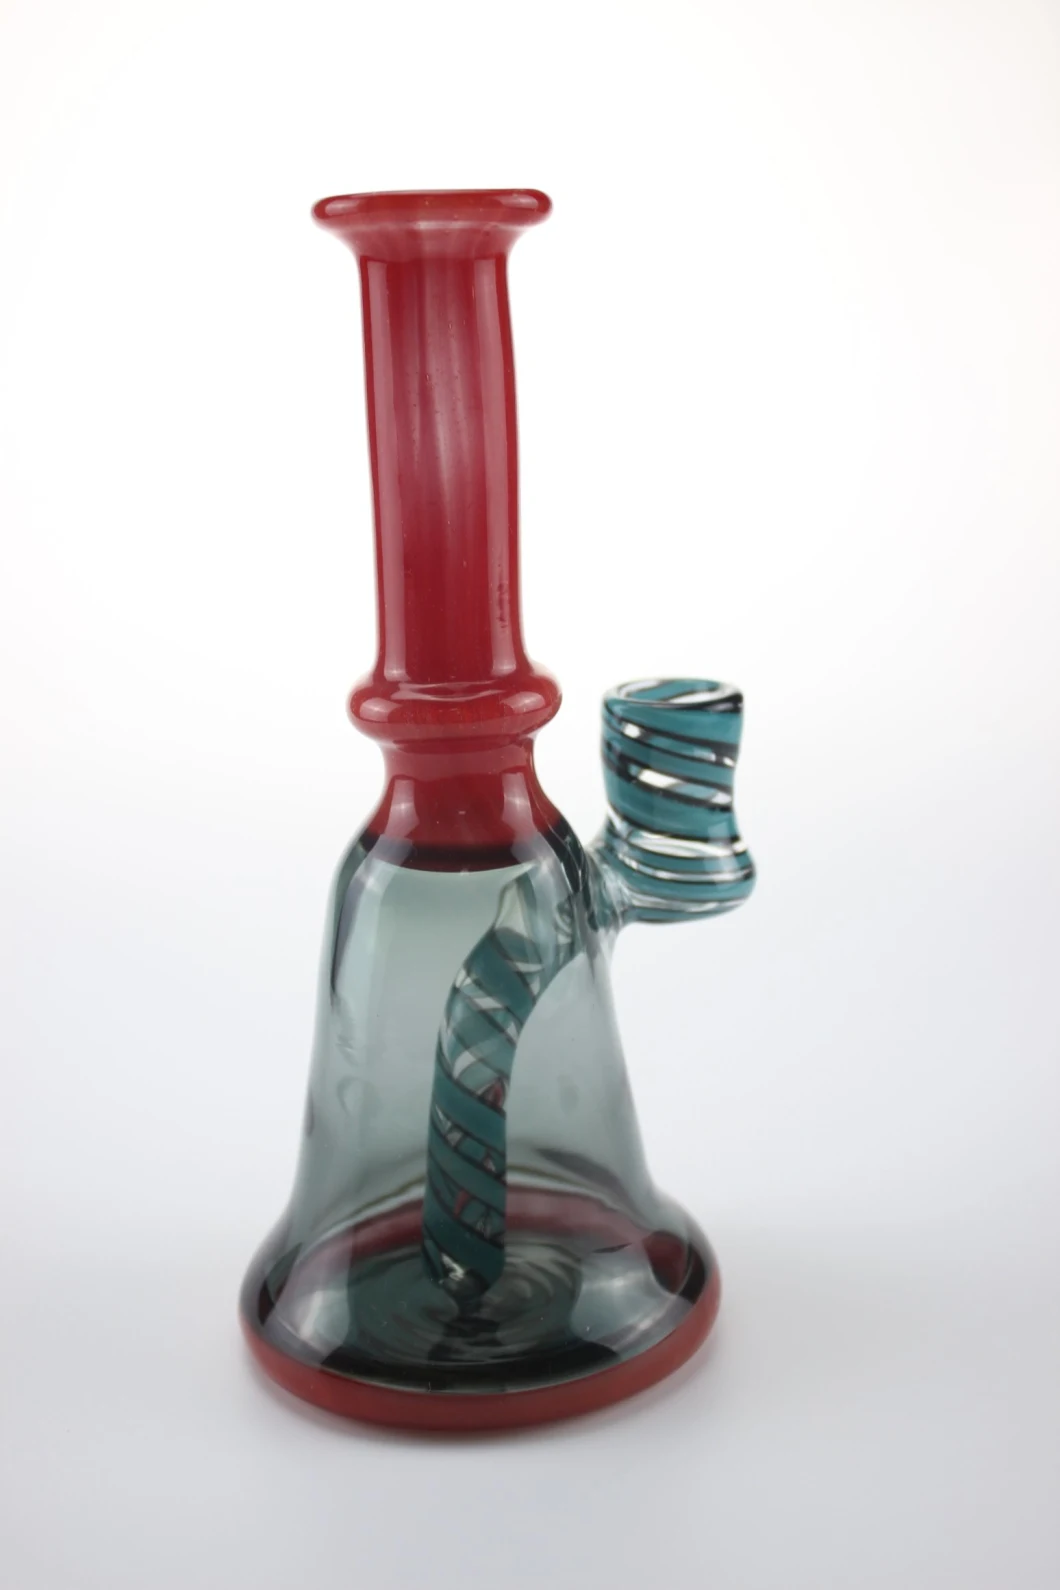 Whoesale Glass Water Pipe Mix Colour Glass Smoking Pipe Healthy DAB Rigs Glass Hand Tobacco Pipes